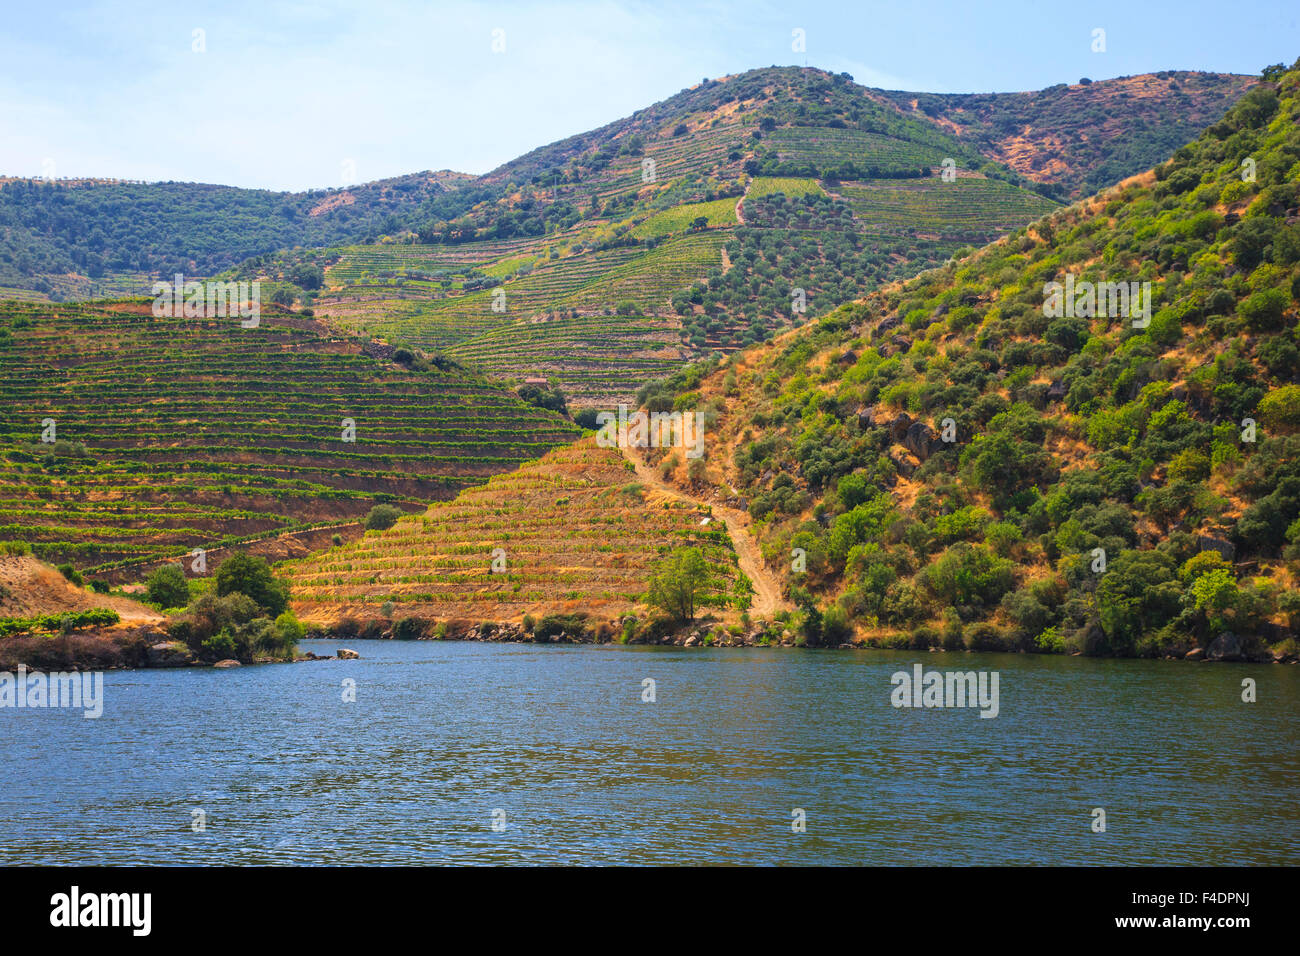 Terraced vineyards that produce port grapes along the Douro river Valley. Stock Photo